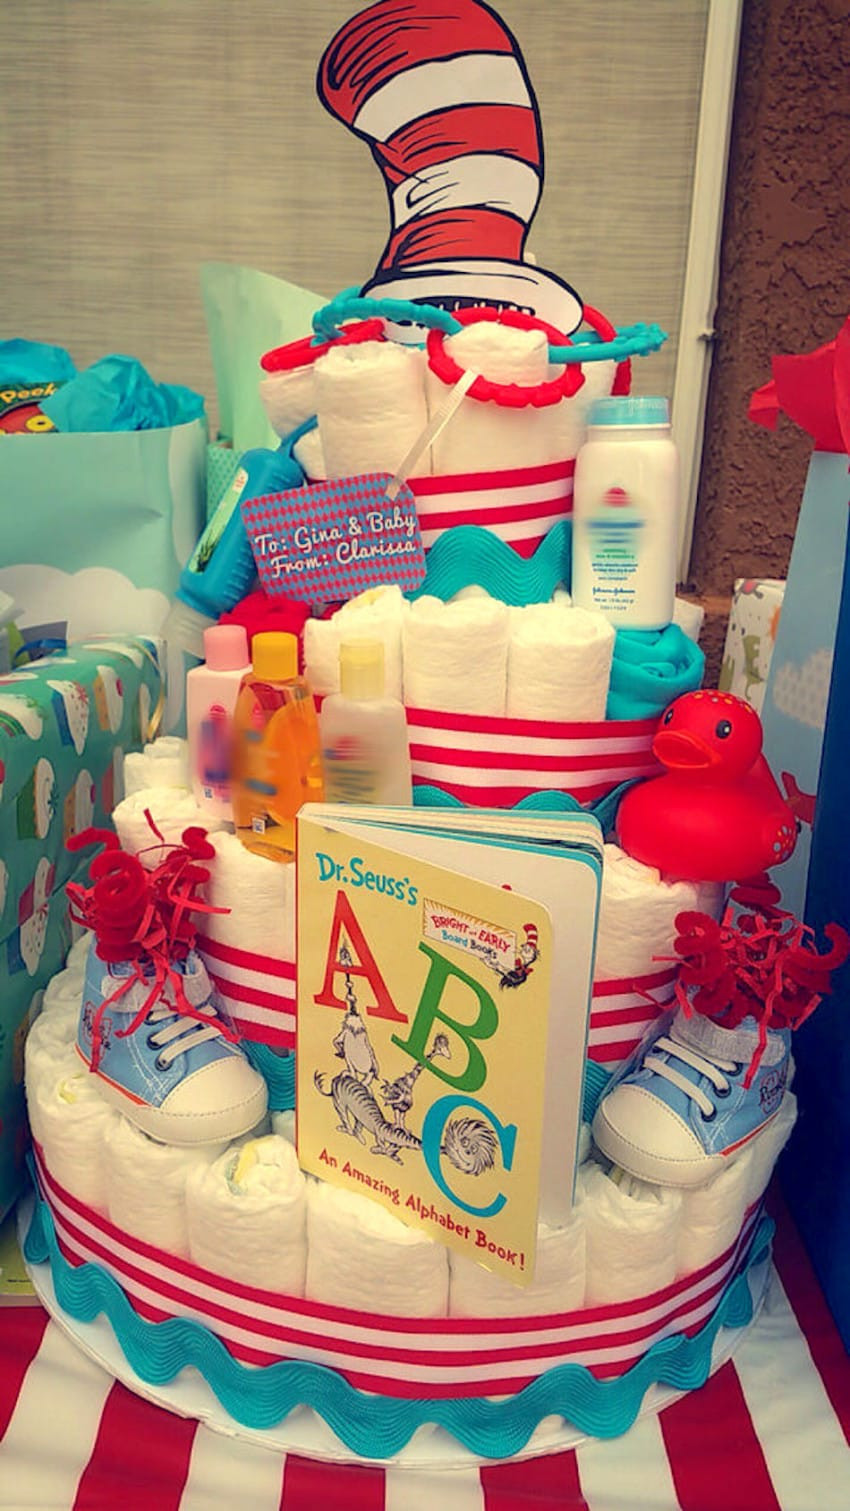 Dr.Seuss Baby Shower Gifts
 11 Fascinating Facts About Dr Seuss